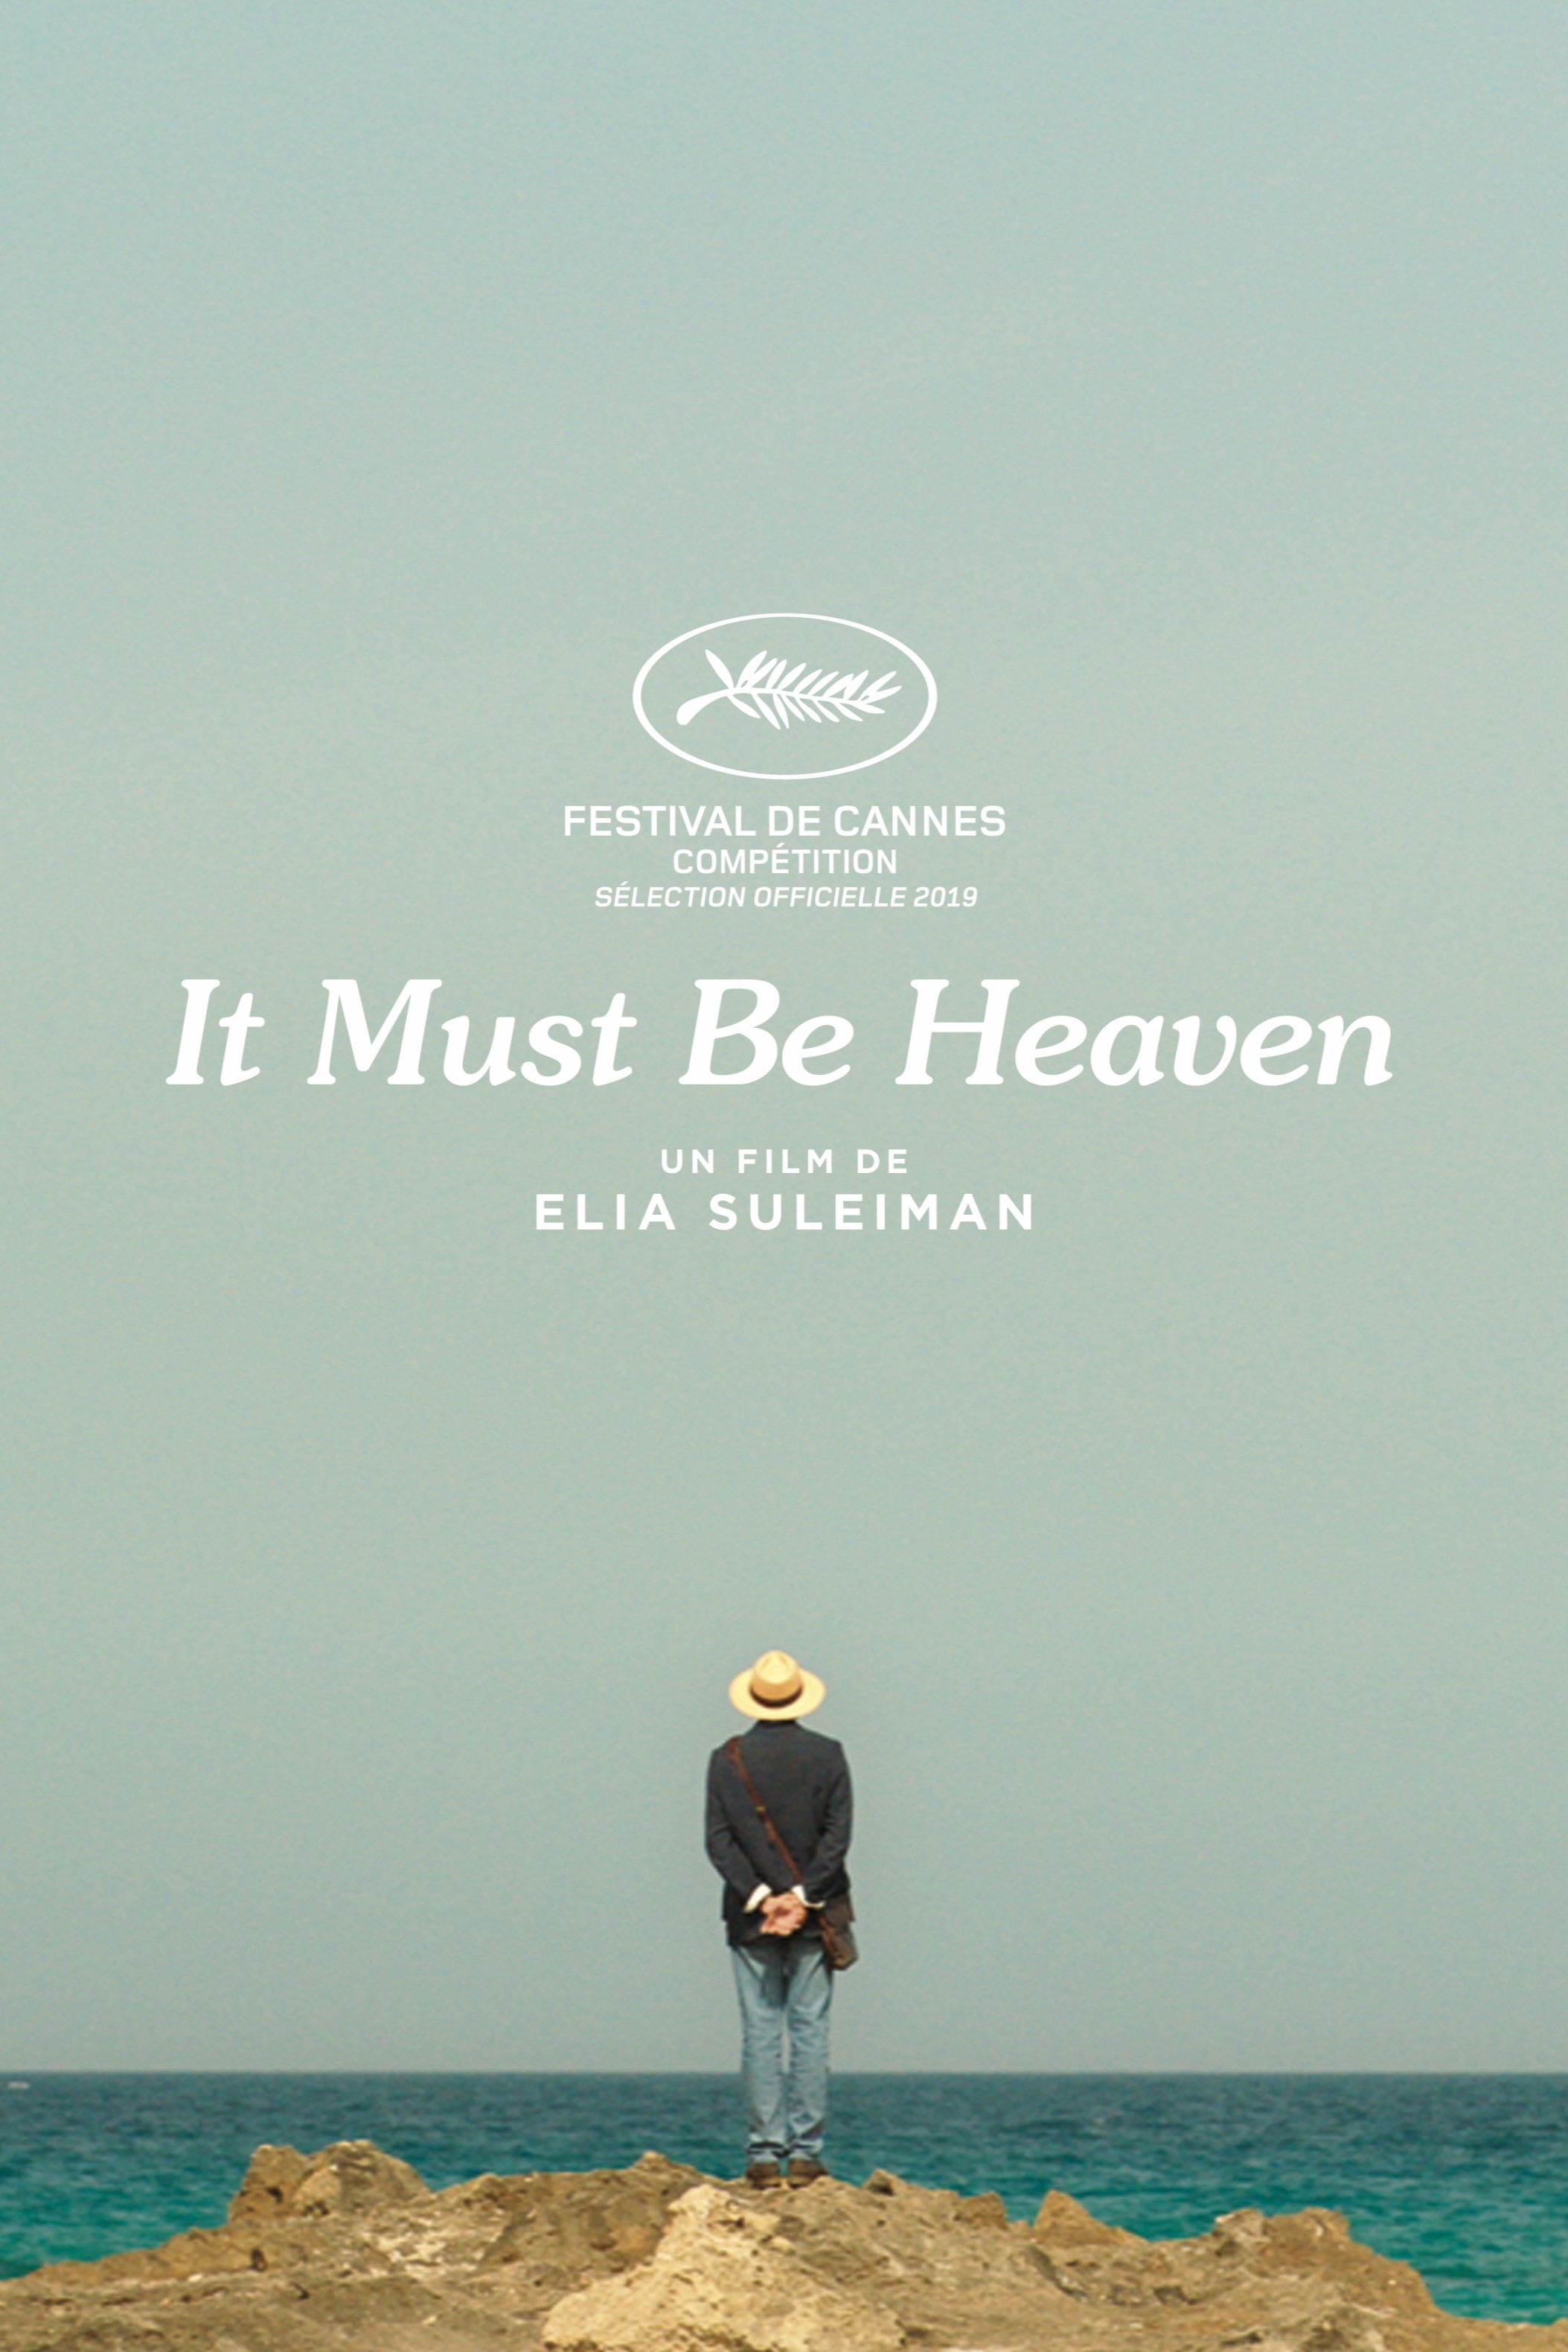 Film poster of Elia Suleiman's "It Must Be Heaven" (distributed by Le Pacte)